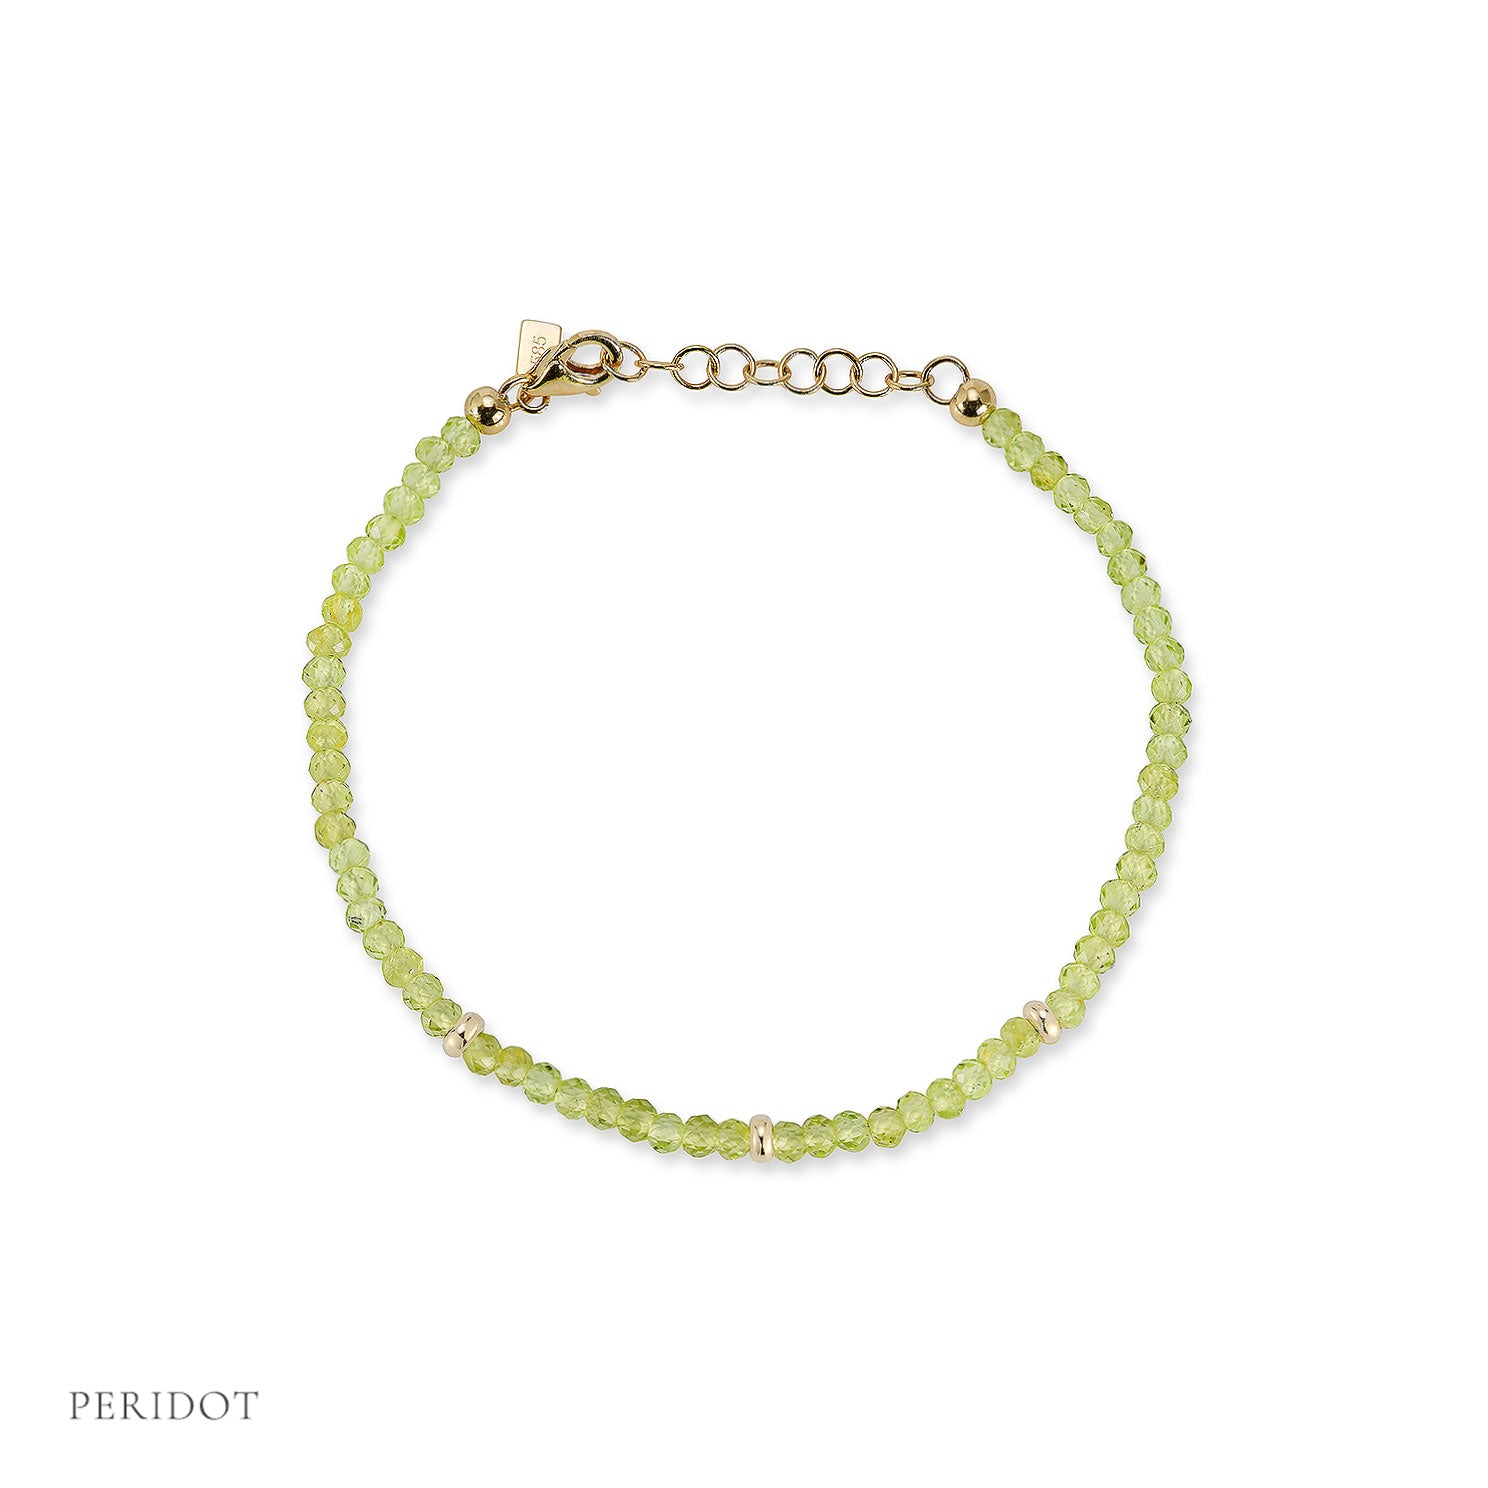 Natural Green Peridot Moss Agate Bracelet With Olivine Crystal Quartz And  Round Beads 10mm For Healing Energy And Lucky Gift For Men And Women From  Mj120, $26.28 | DHgate.Com